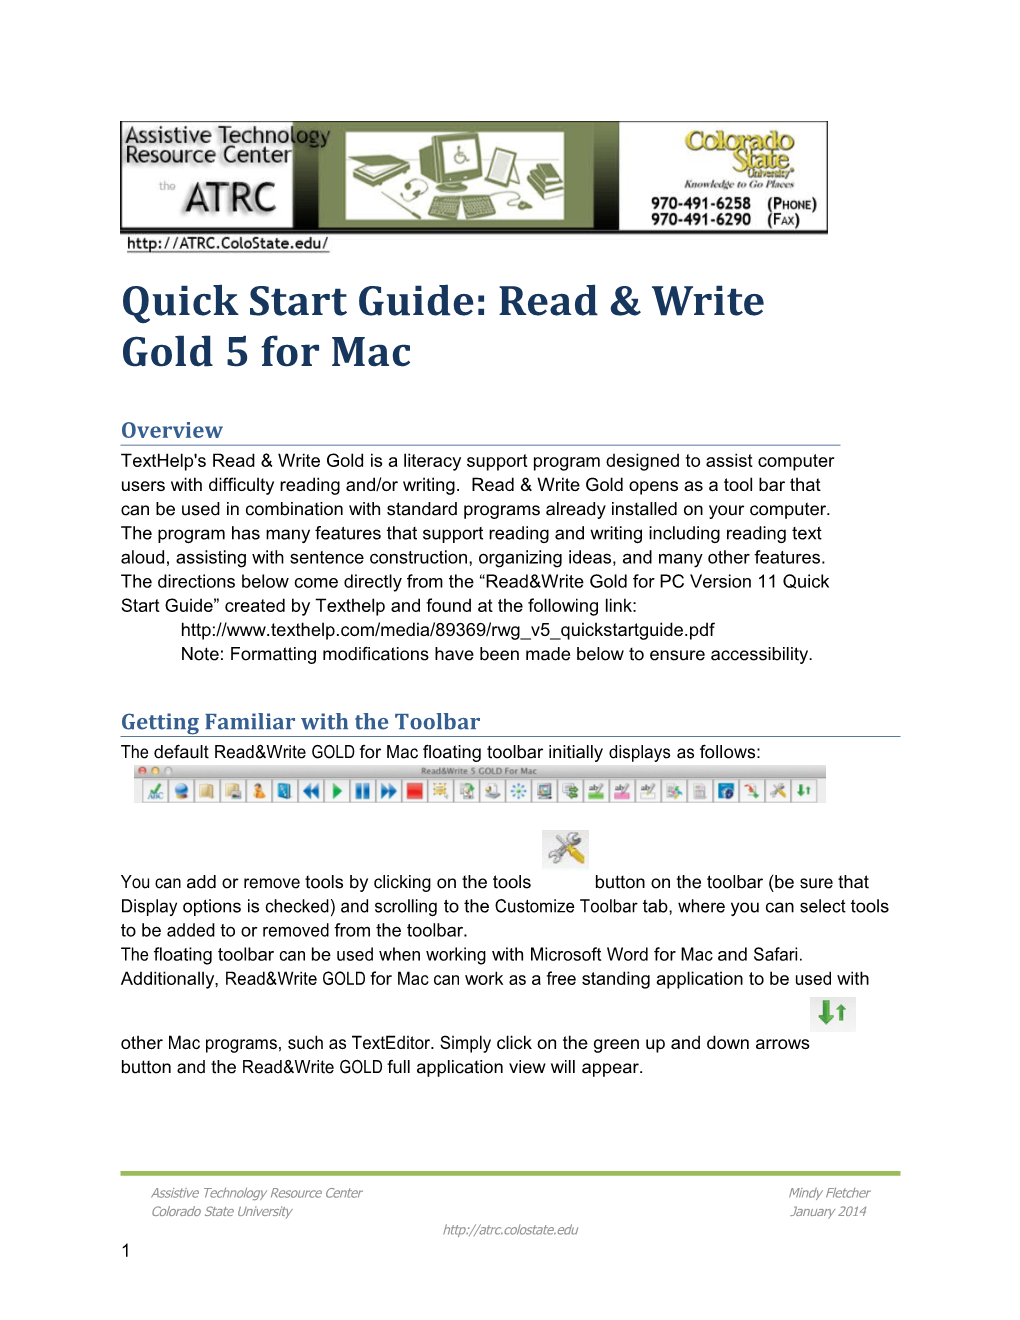 Quick Start Guide: Read & Write Gold5 for Mac